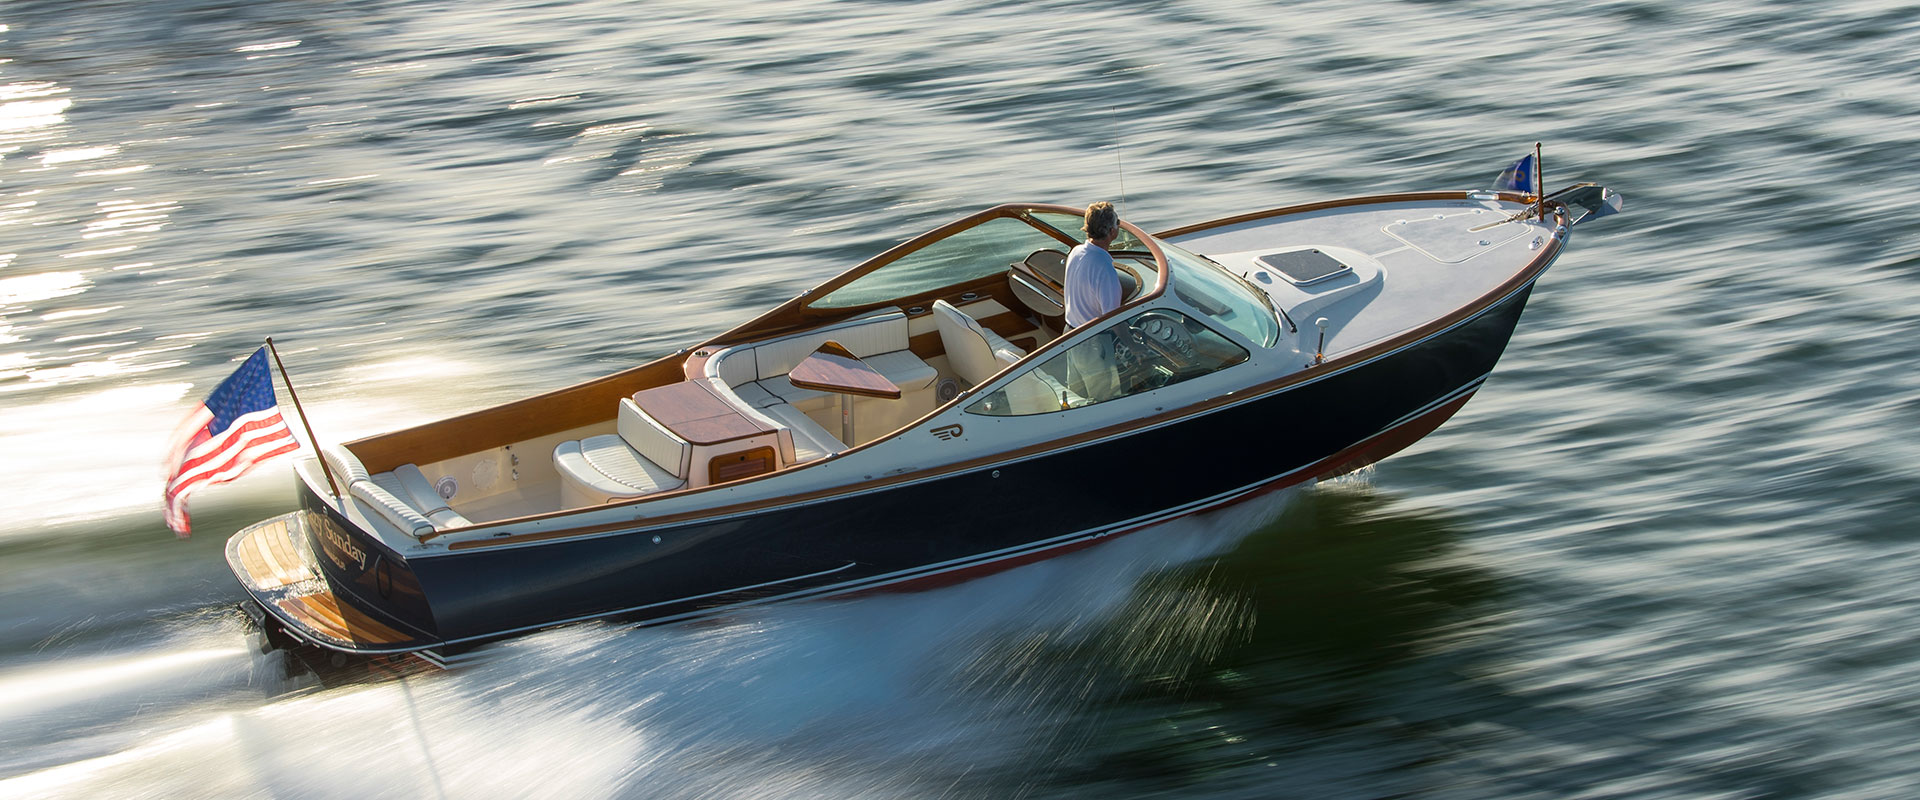 savage runabout boat